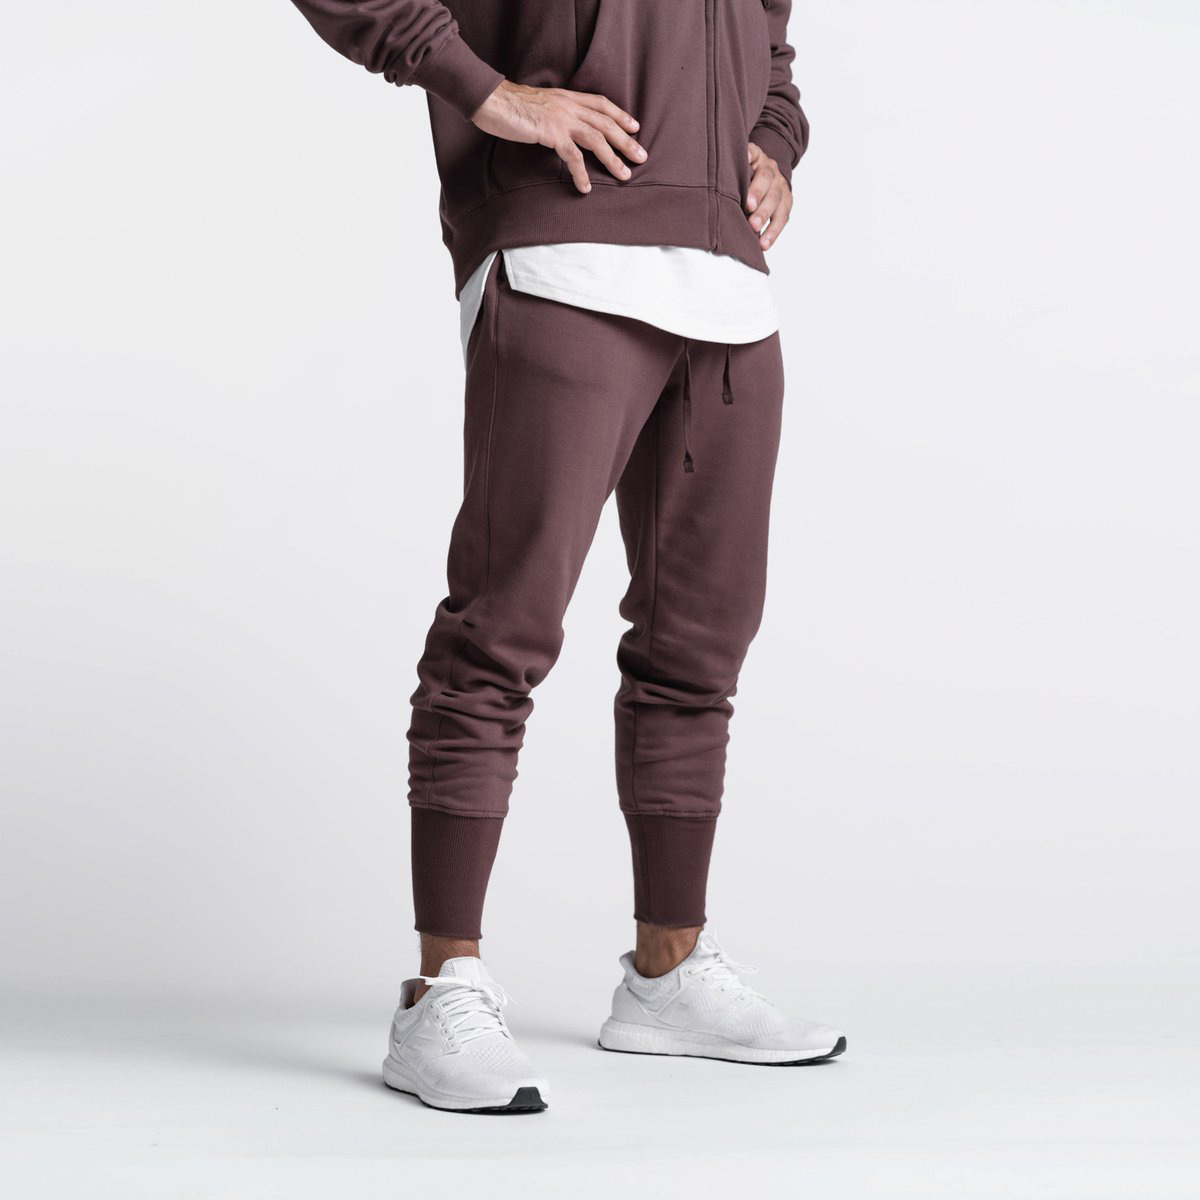 ZHB-CK2006 Men's Casual Pants Solid Color Fashion Matching Large Size Elasticated Waist Bunched Sweatpants